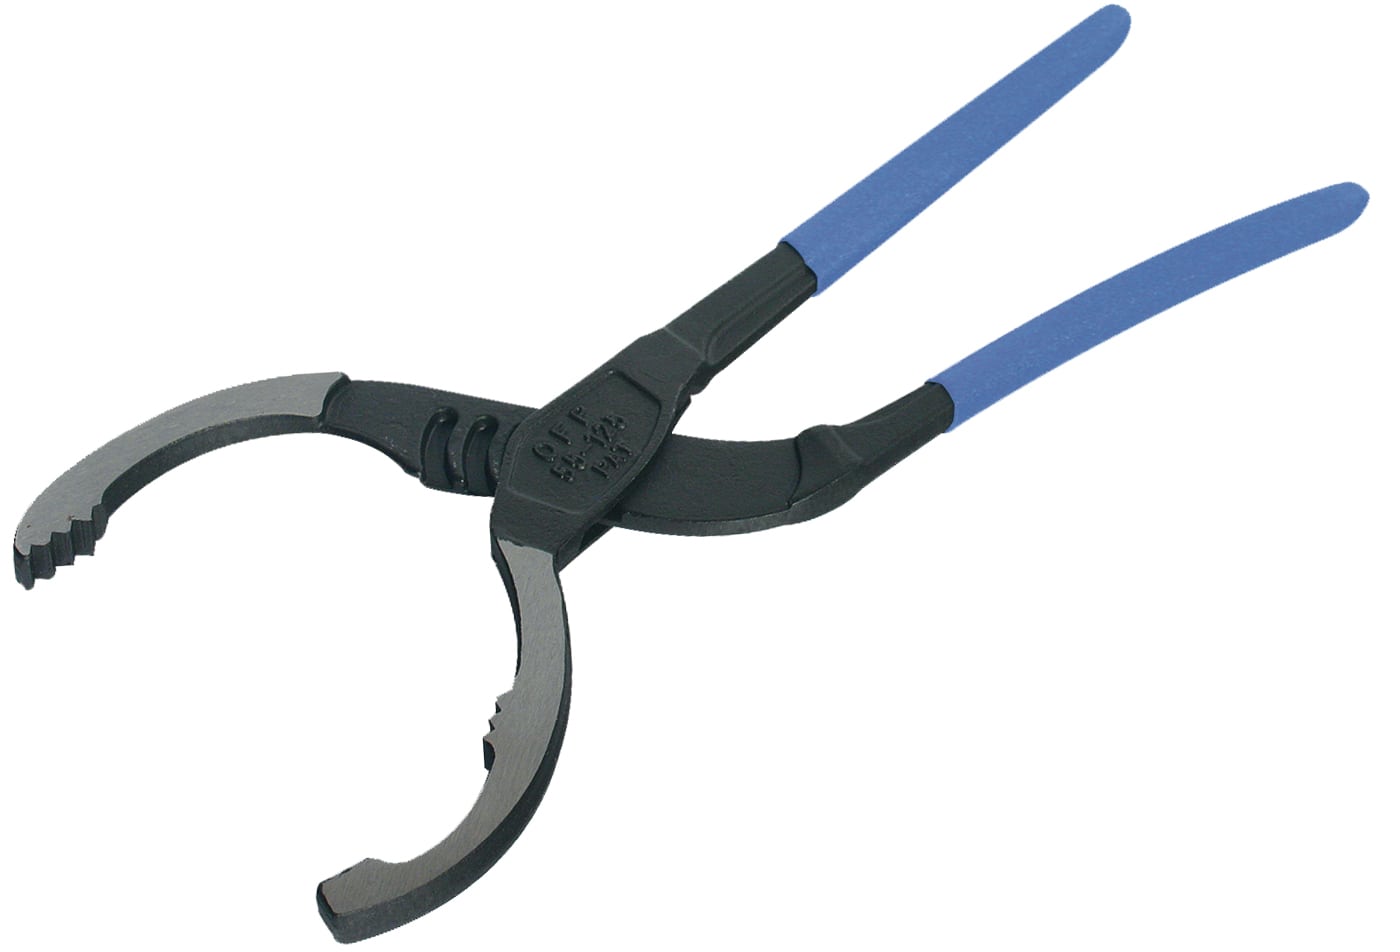 Oil Filter Pliers - SP64008SB by SP Tools